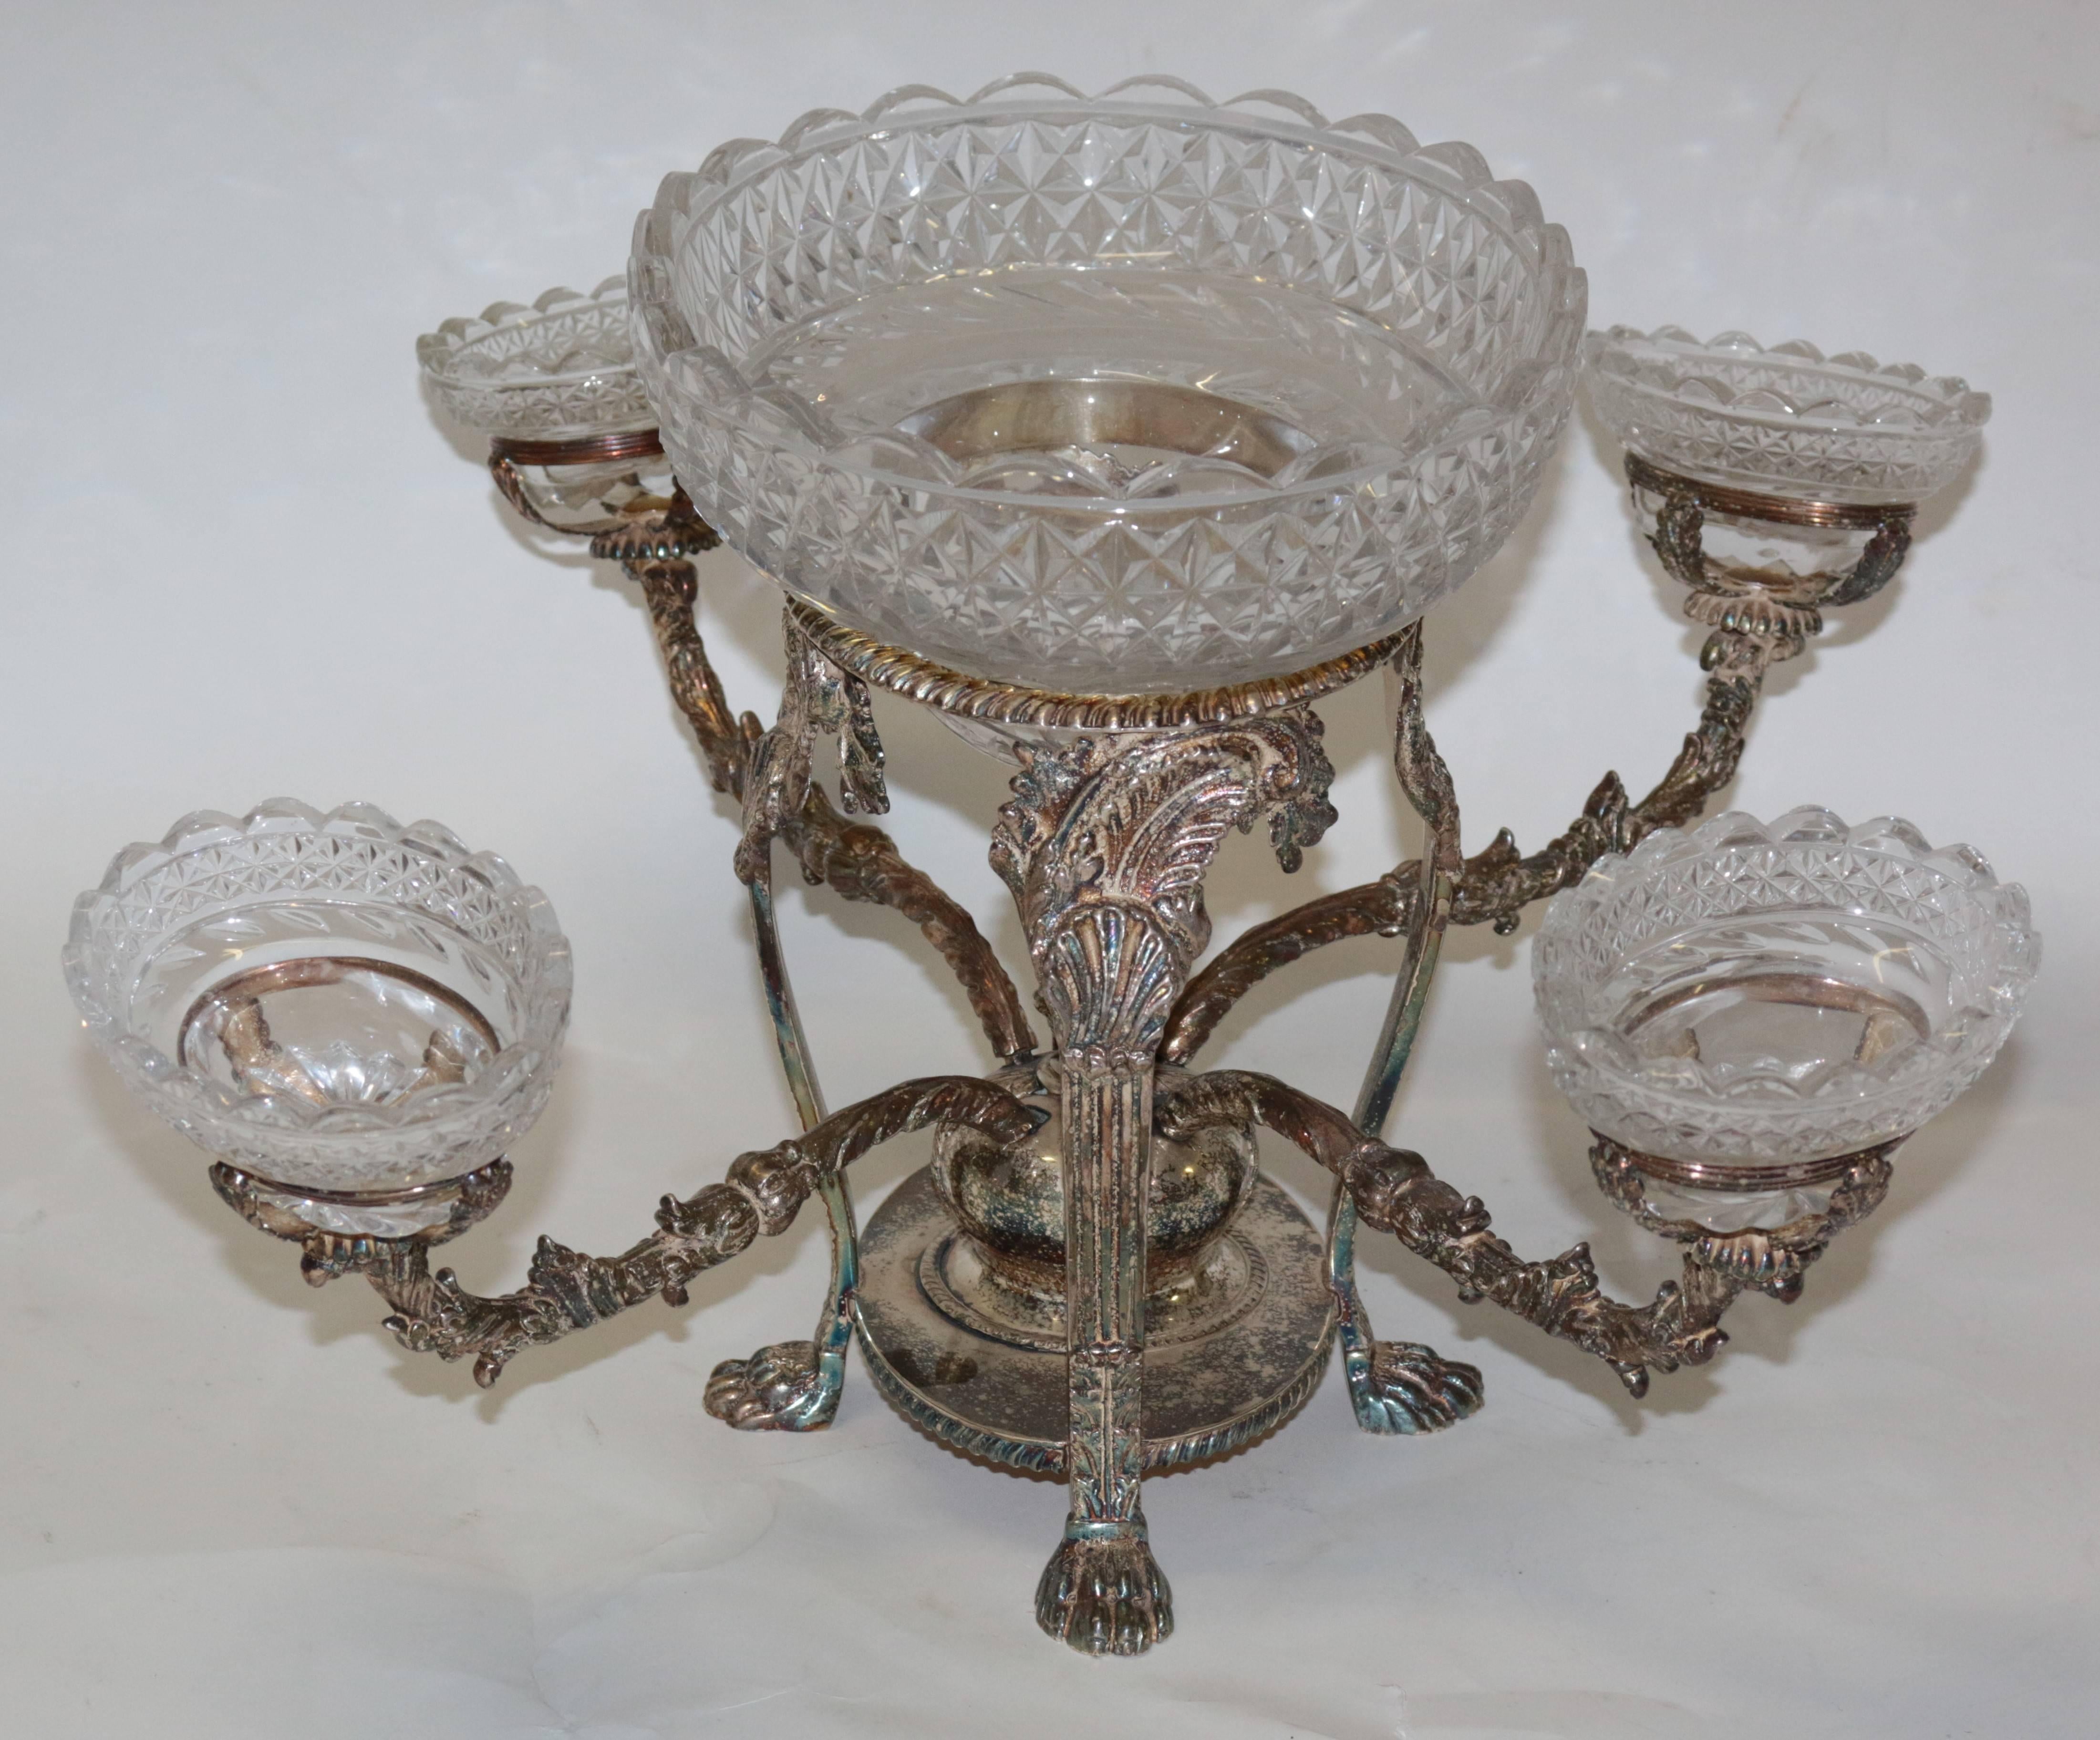 English Silver Plated Centrepiece with Four Arms in Bohemian Cut Crystal